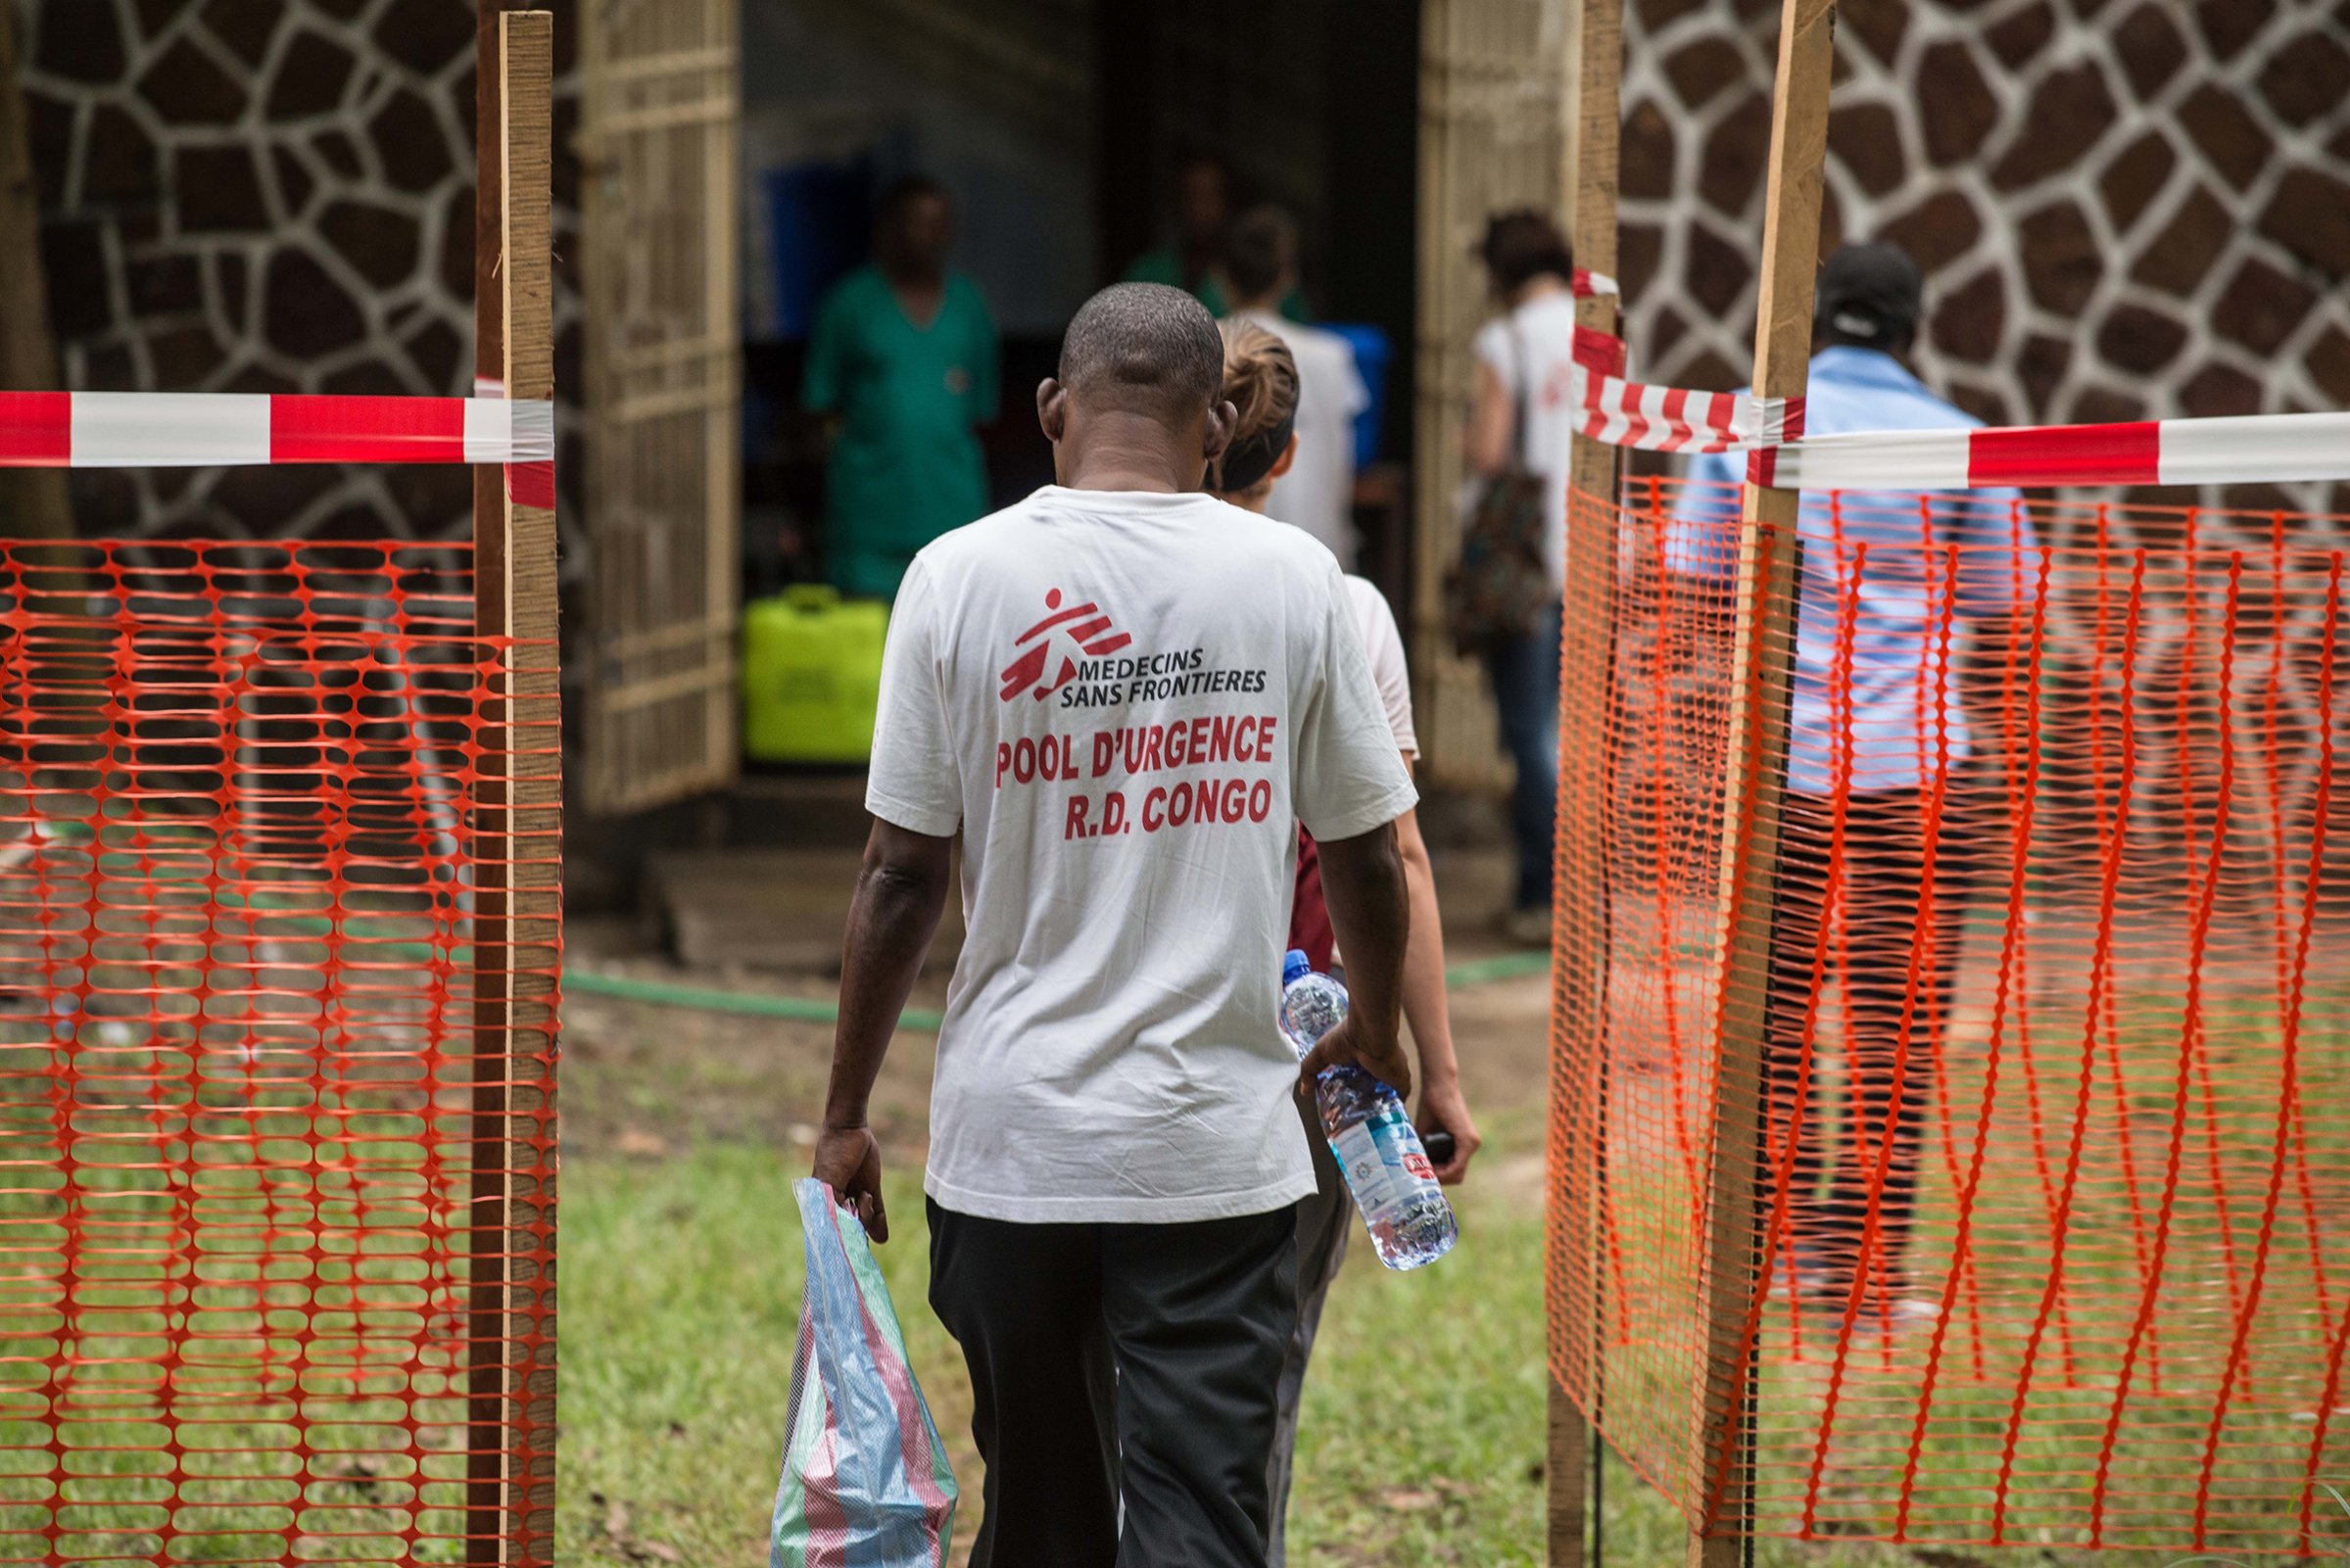 Médecins sans frontière team members walk through an Ebola security zone in Mbandaka, Democratic Republic of Congo, on May 20, 2018